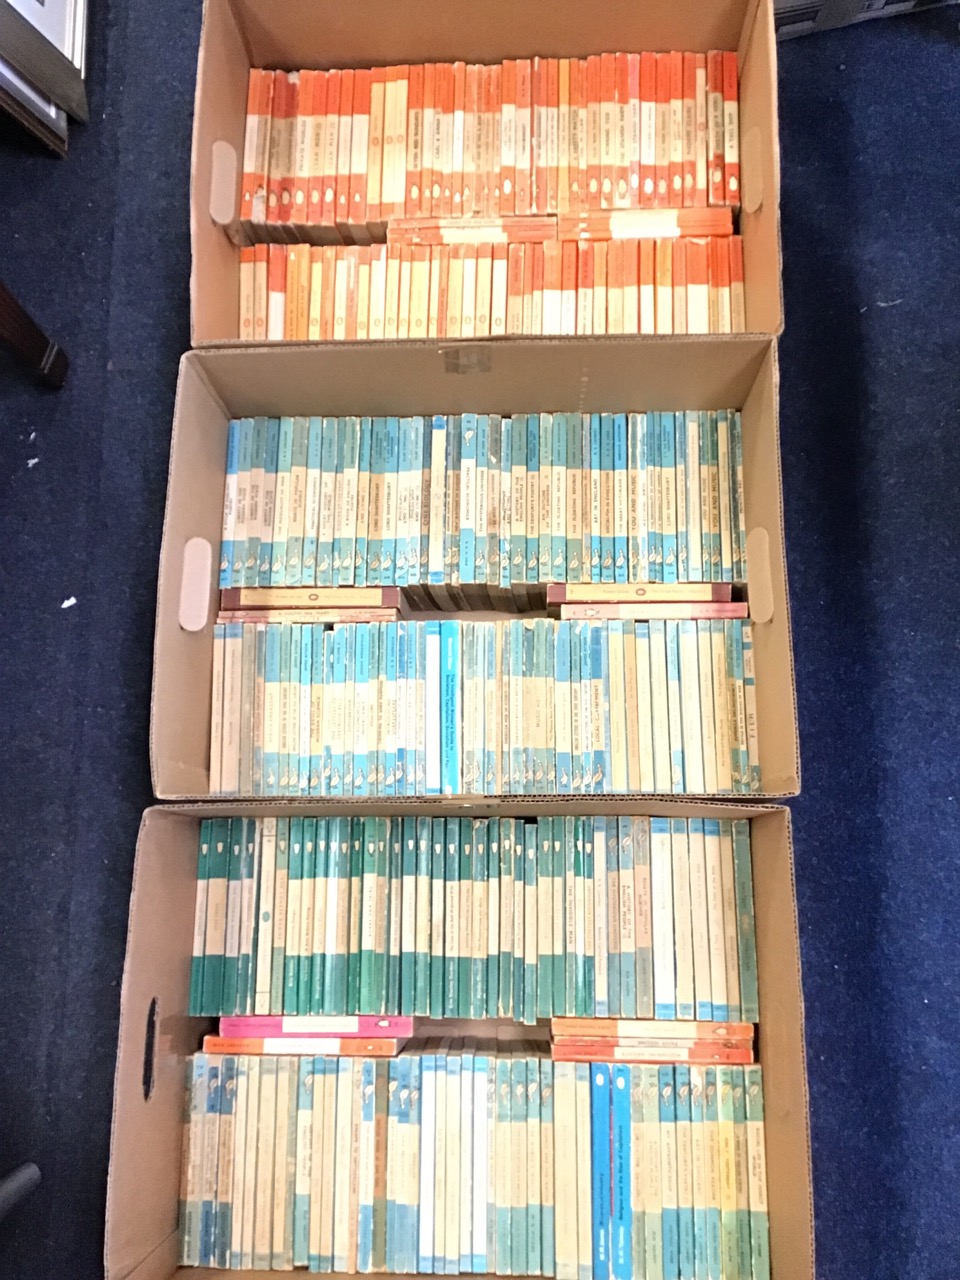 A collection of early Penguin & Pelican paperbacks - novels, histories, mysteries, academic